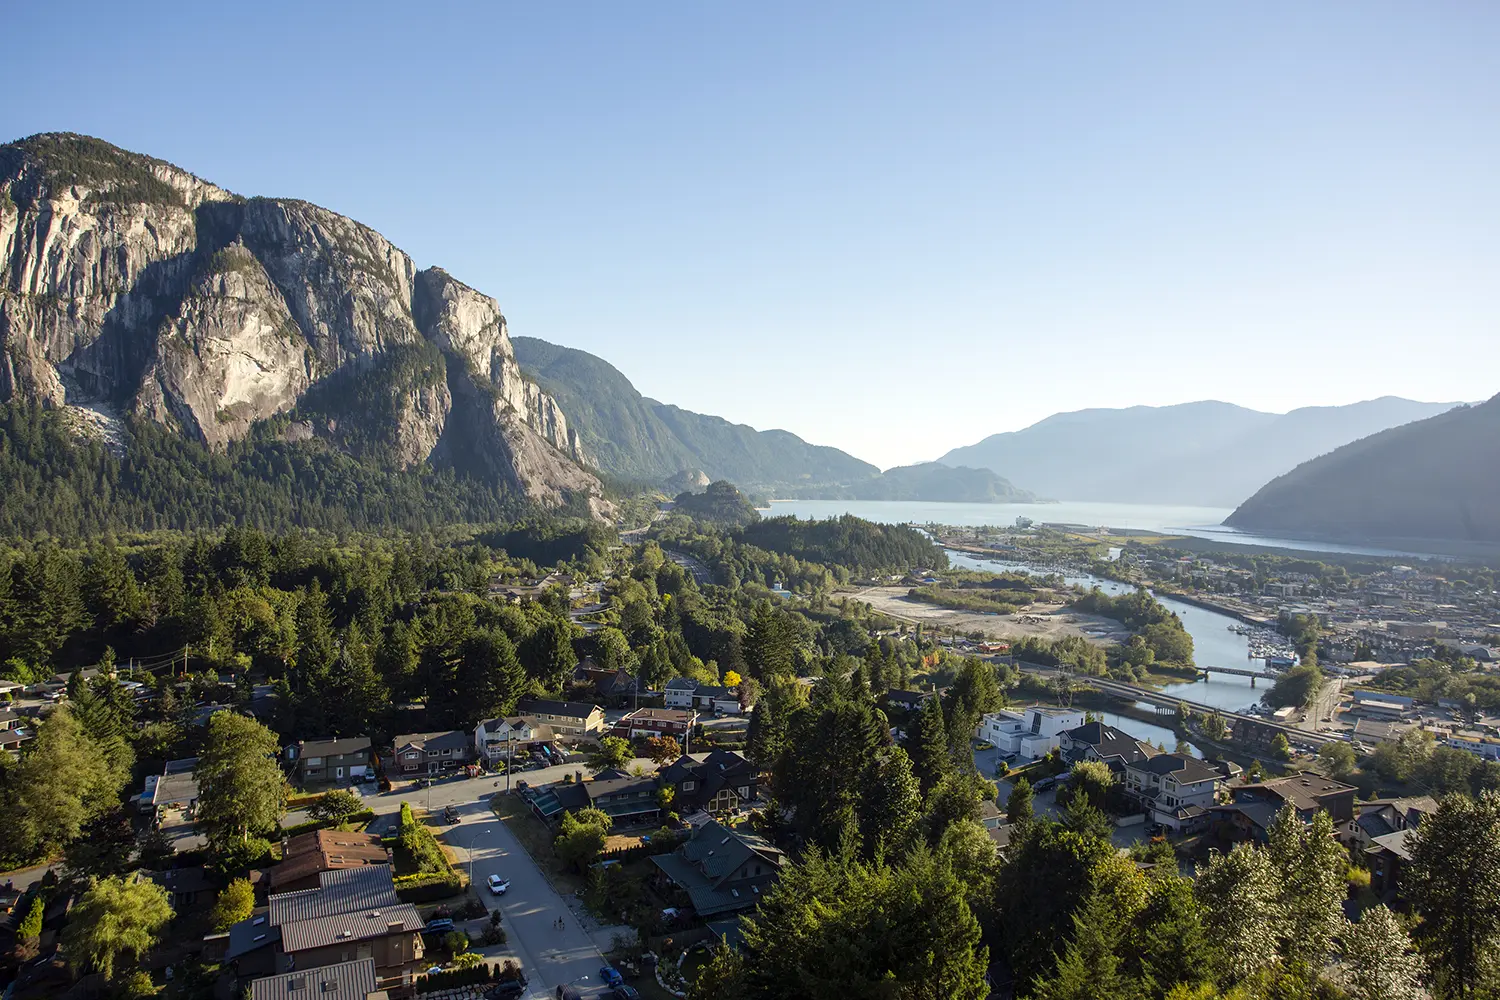 Stawamus Chief Provincial Park protects the 700 metre massive granite cliffs that stand at the southern entrance to Squamish on the scenic Sea to Sky Highway in Squamish, British Columbia, Canada.